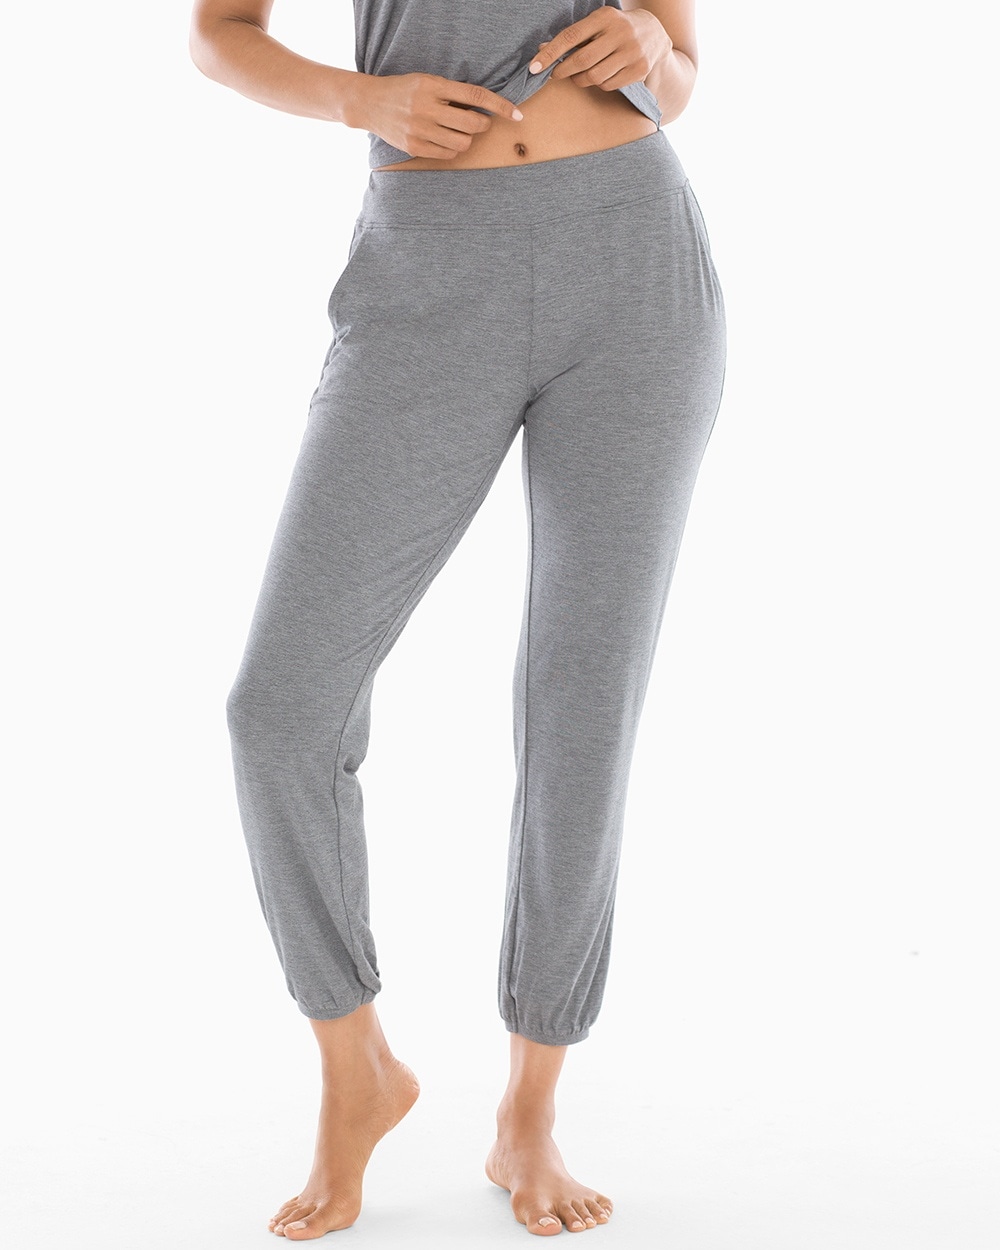 Cool Nights Banded Ankle Pajama Pants Heather Graphite